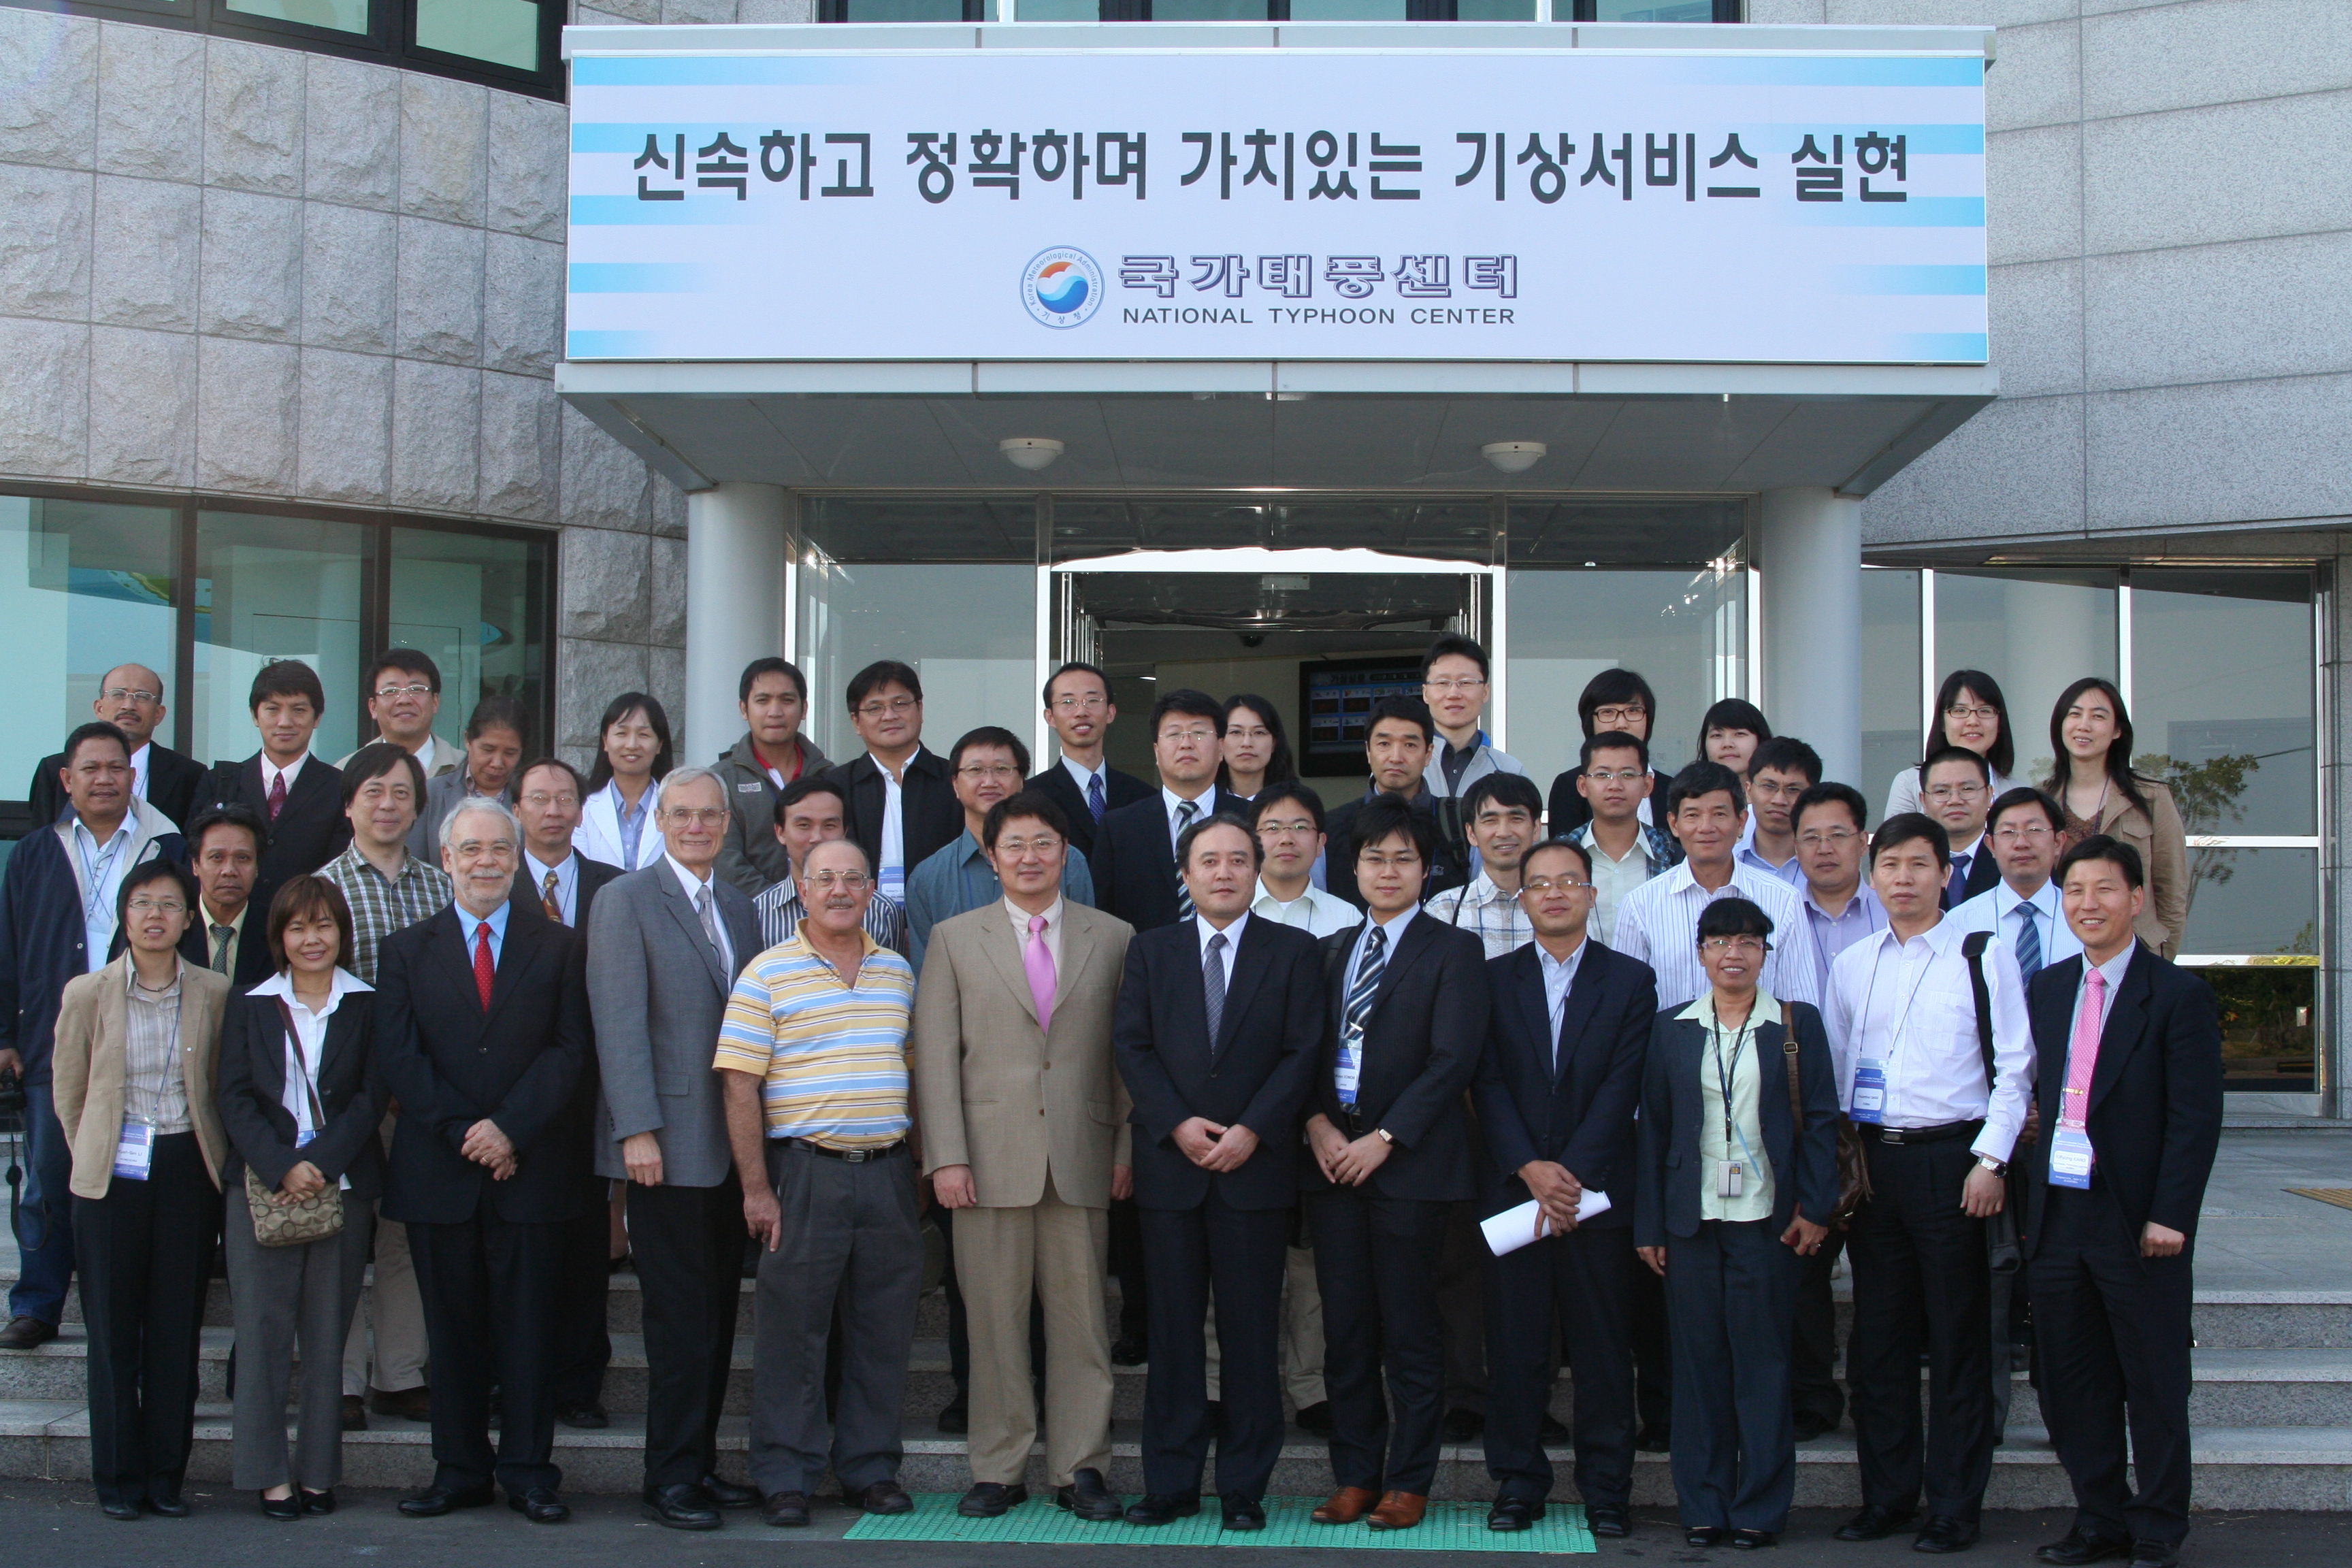 Visit to the Korea National Typhoon Center in Jeju on 13 May 2009 during the 1st TRCG Technical Forum.